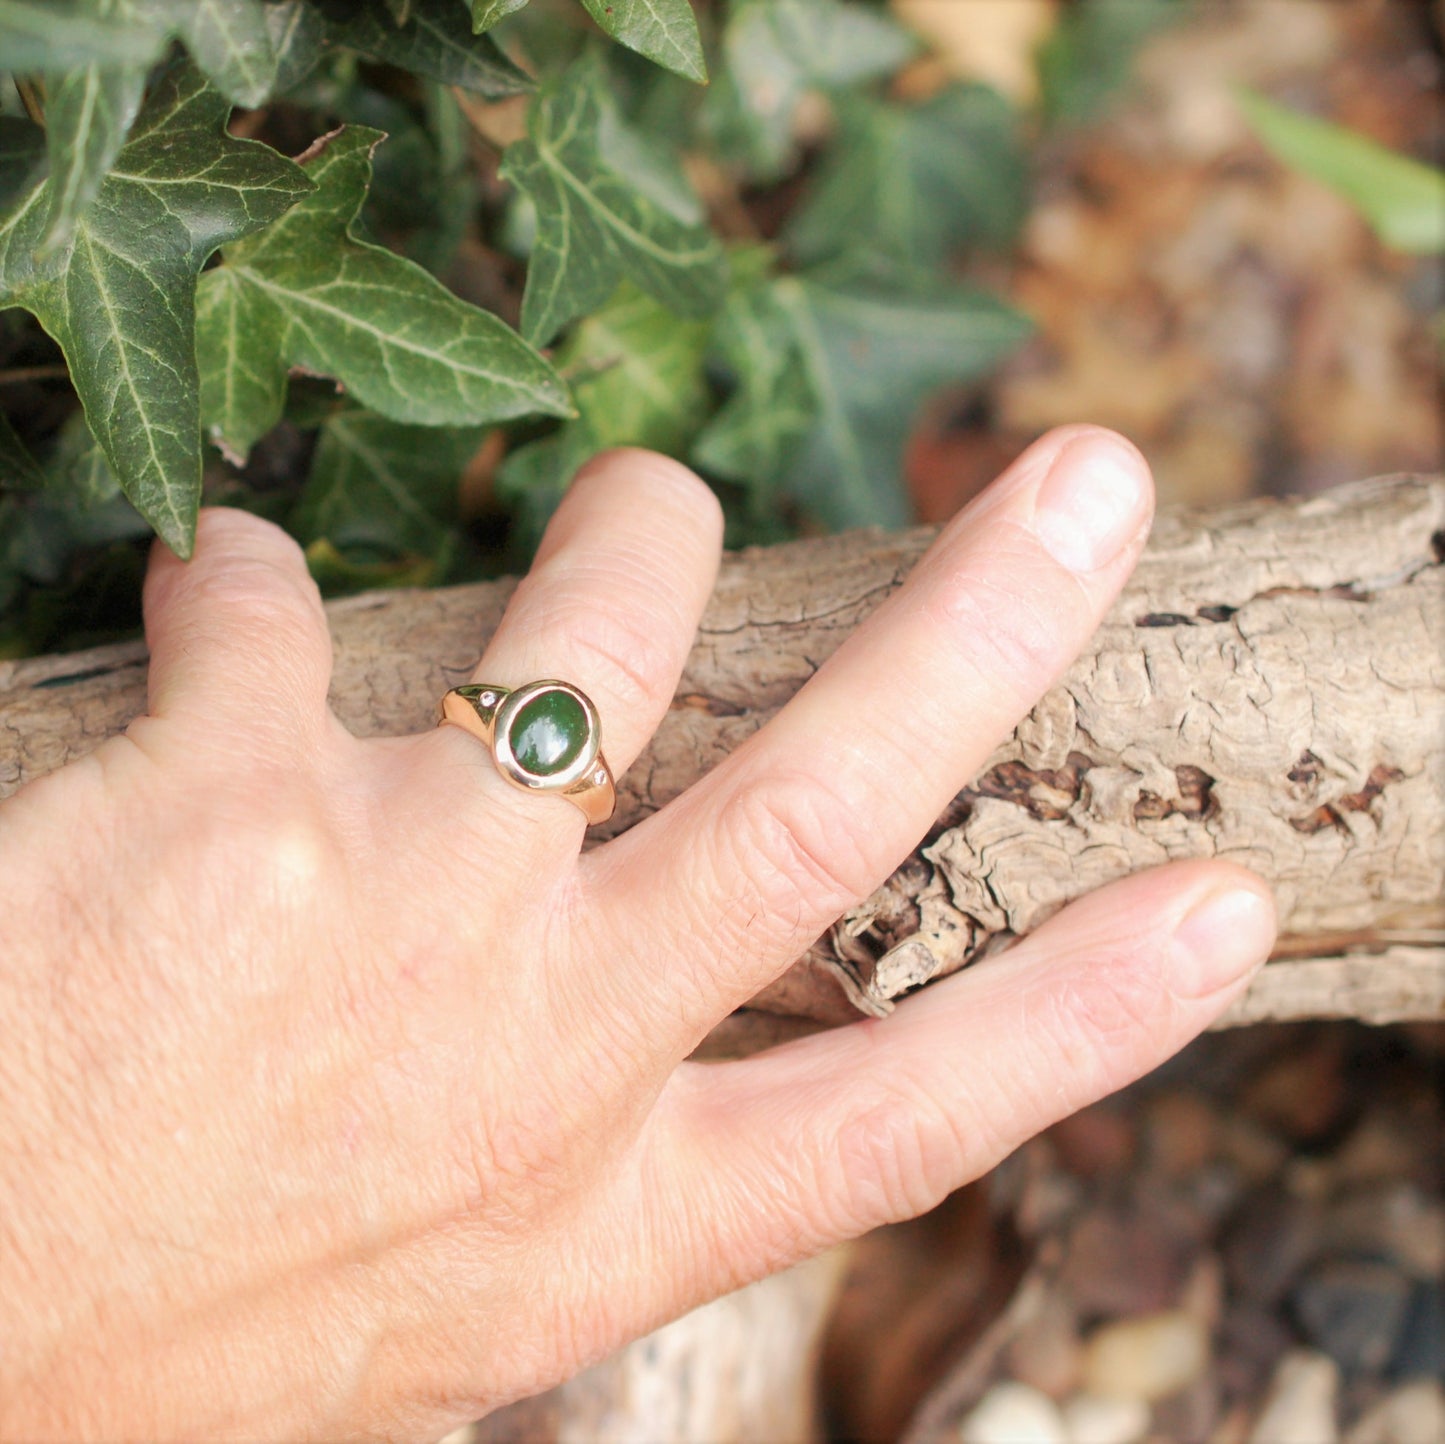 Jade, diamond and gold, Gentleman's signet or Lady's dress ring. Handmade in England by Adrian Ashley with London Hallmarks. UK size N ½ or US 7.